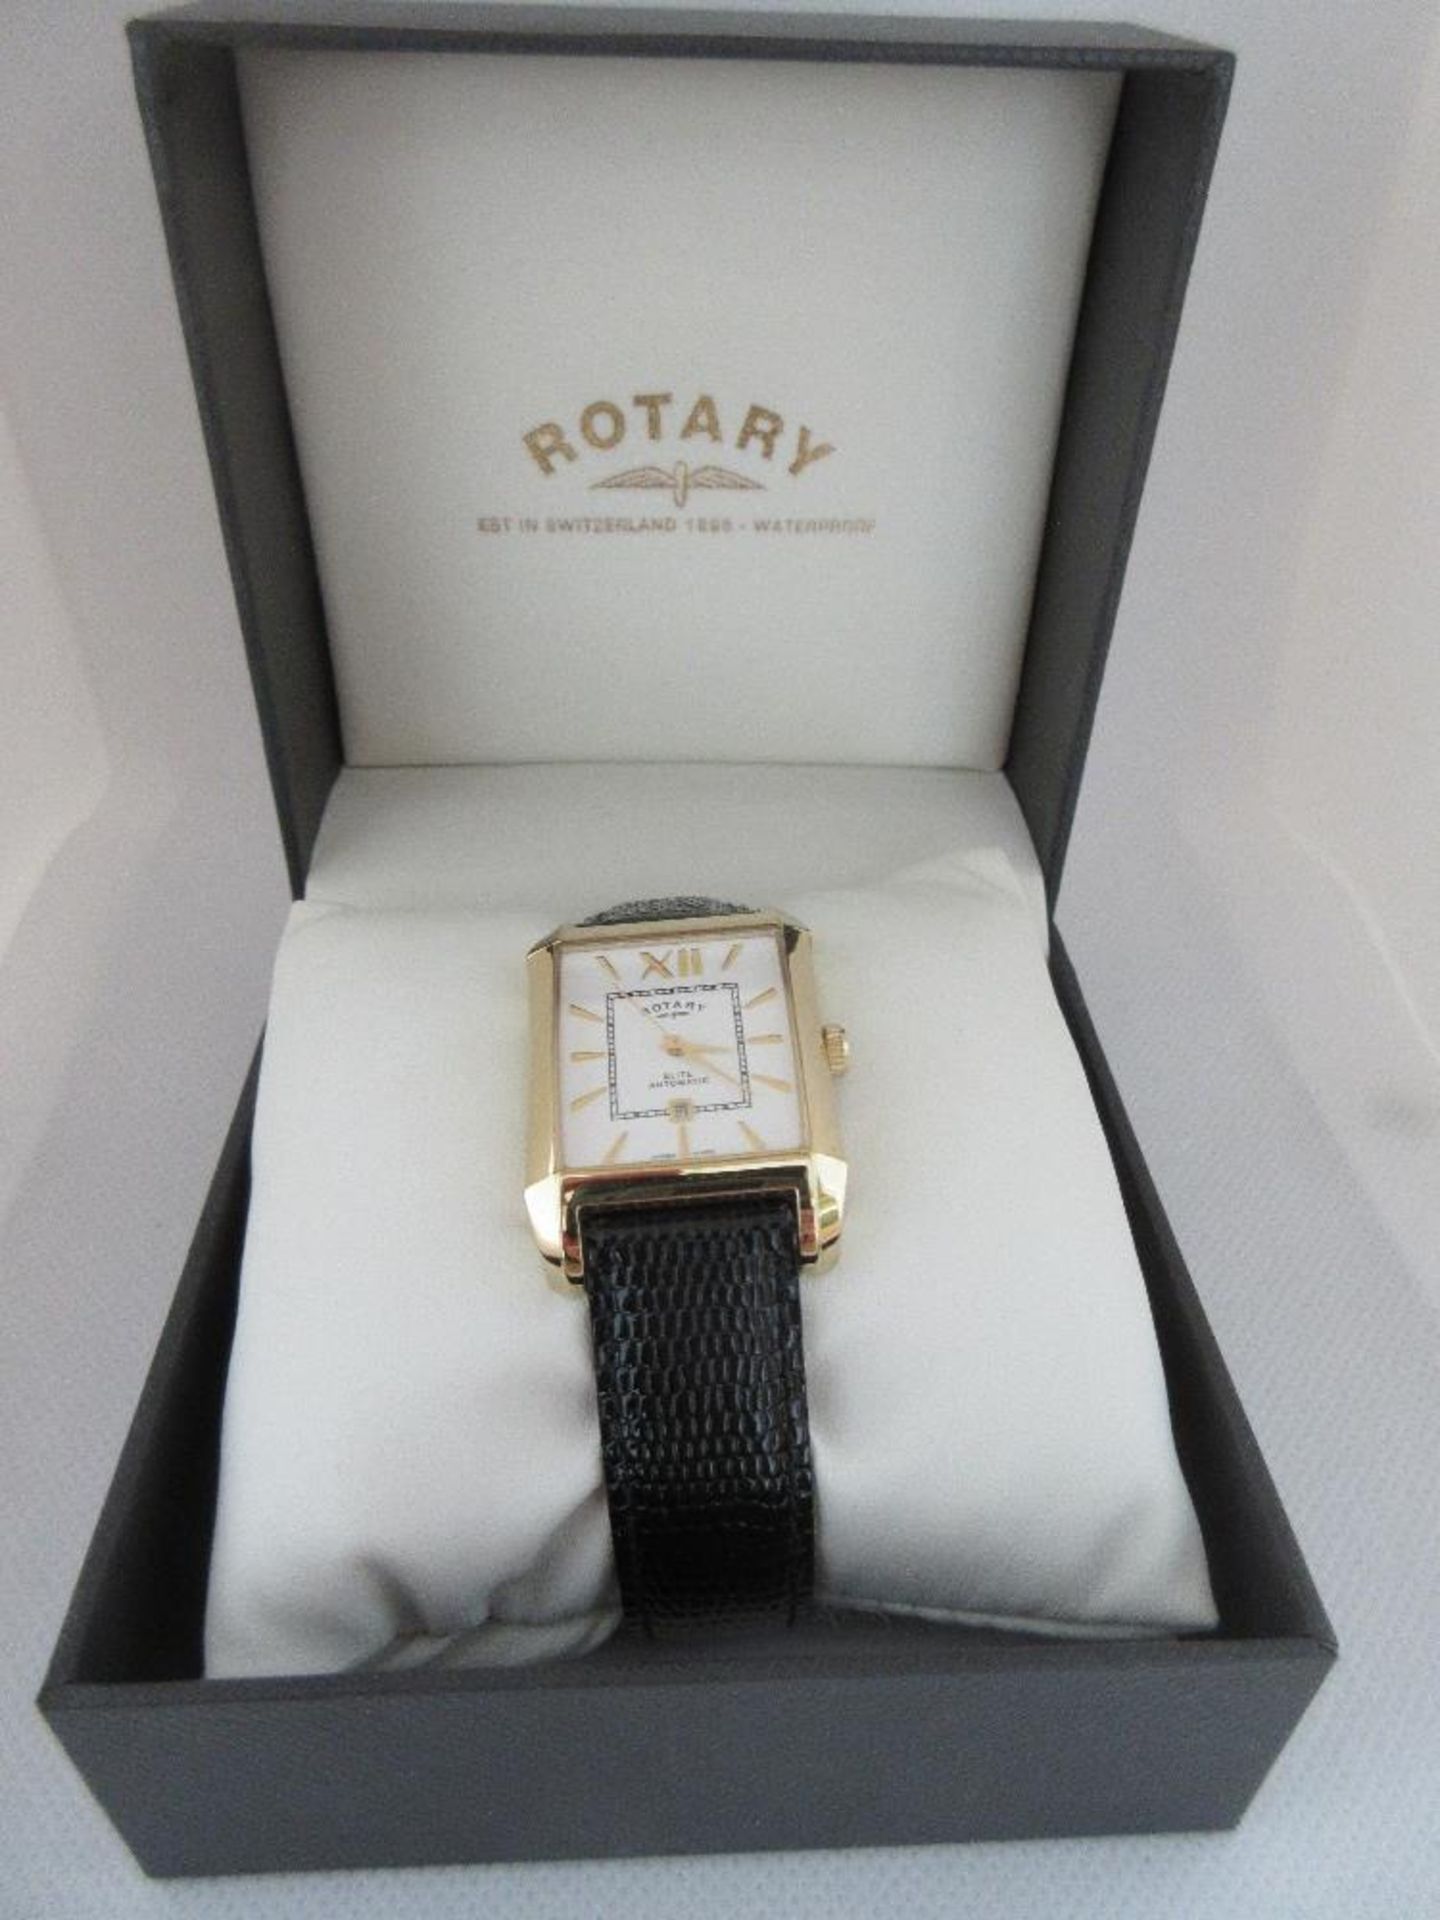 ROTARY MALE WATCH, MODEL GS02283/01S, CASE DIAMETER 28MM, LEATHER STRAP, BOXED